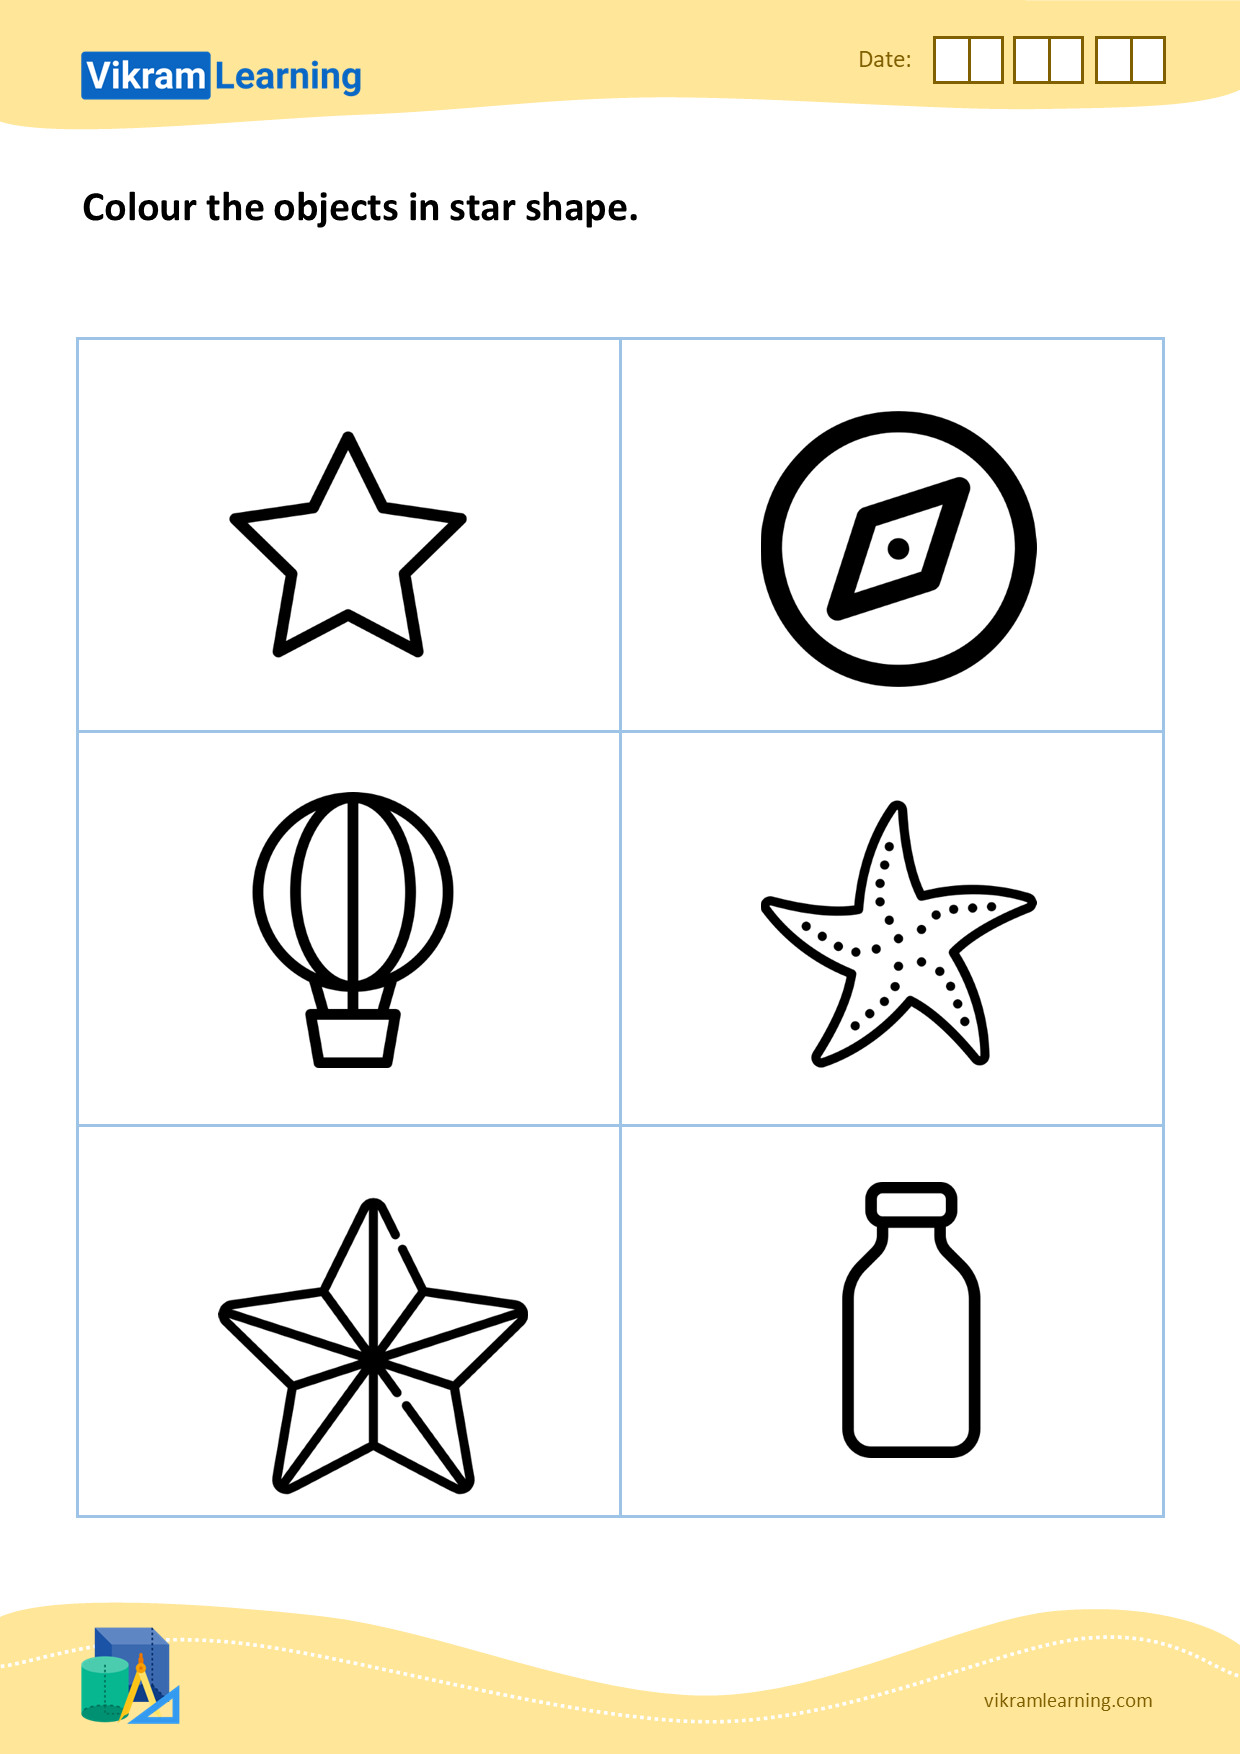 Colour the objects in star shape